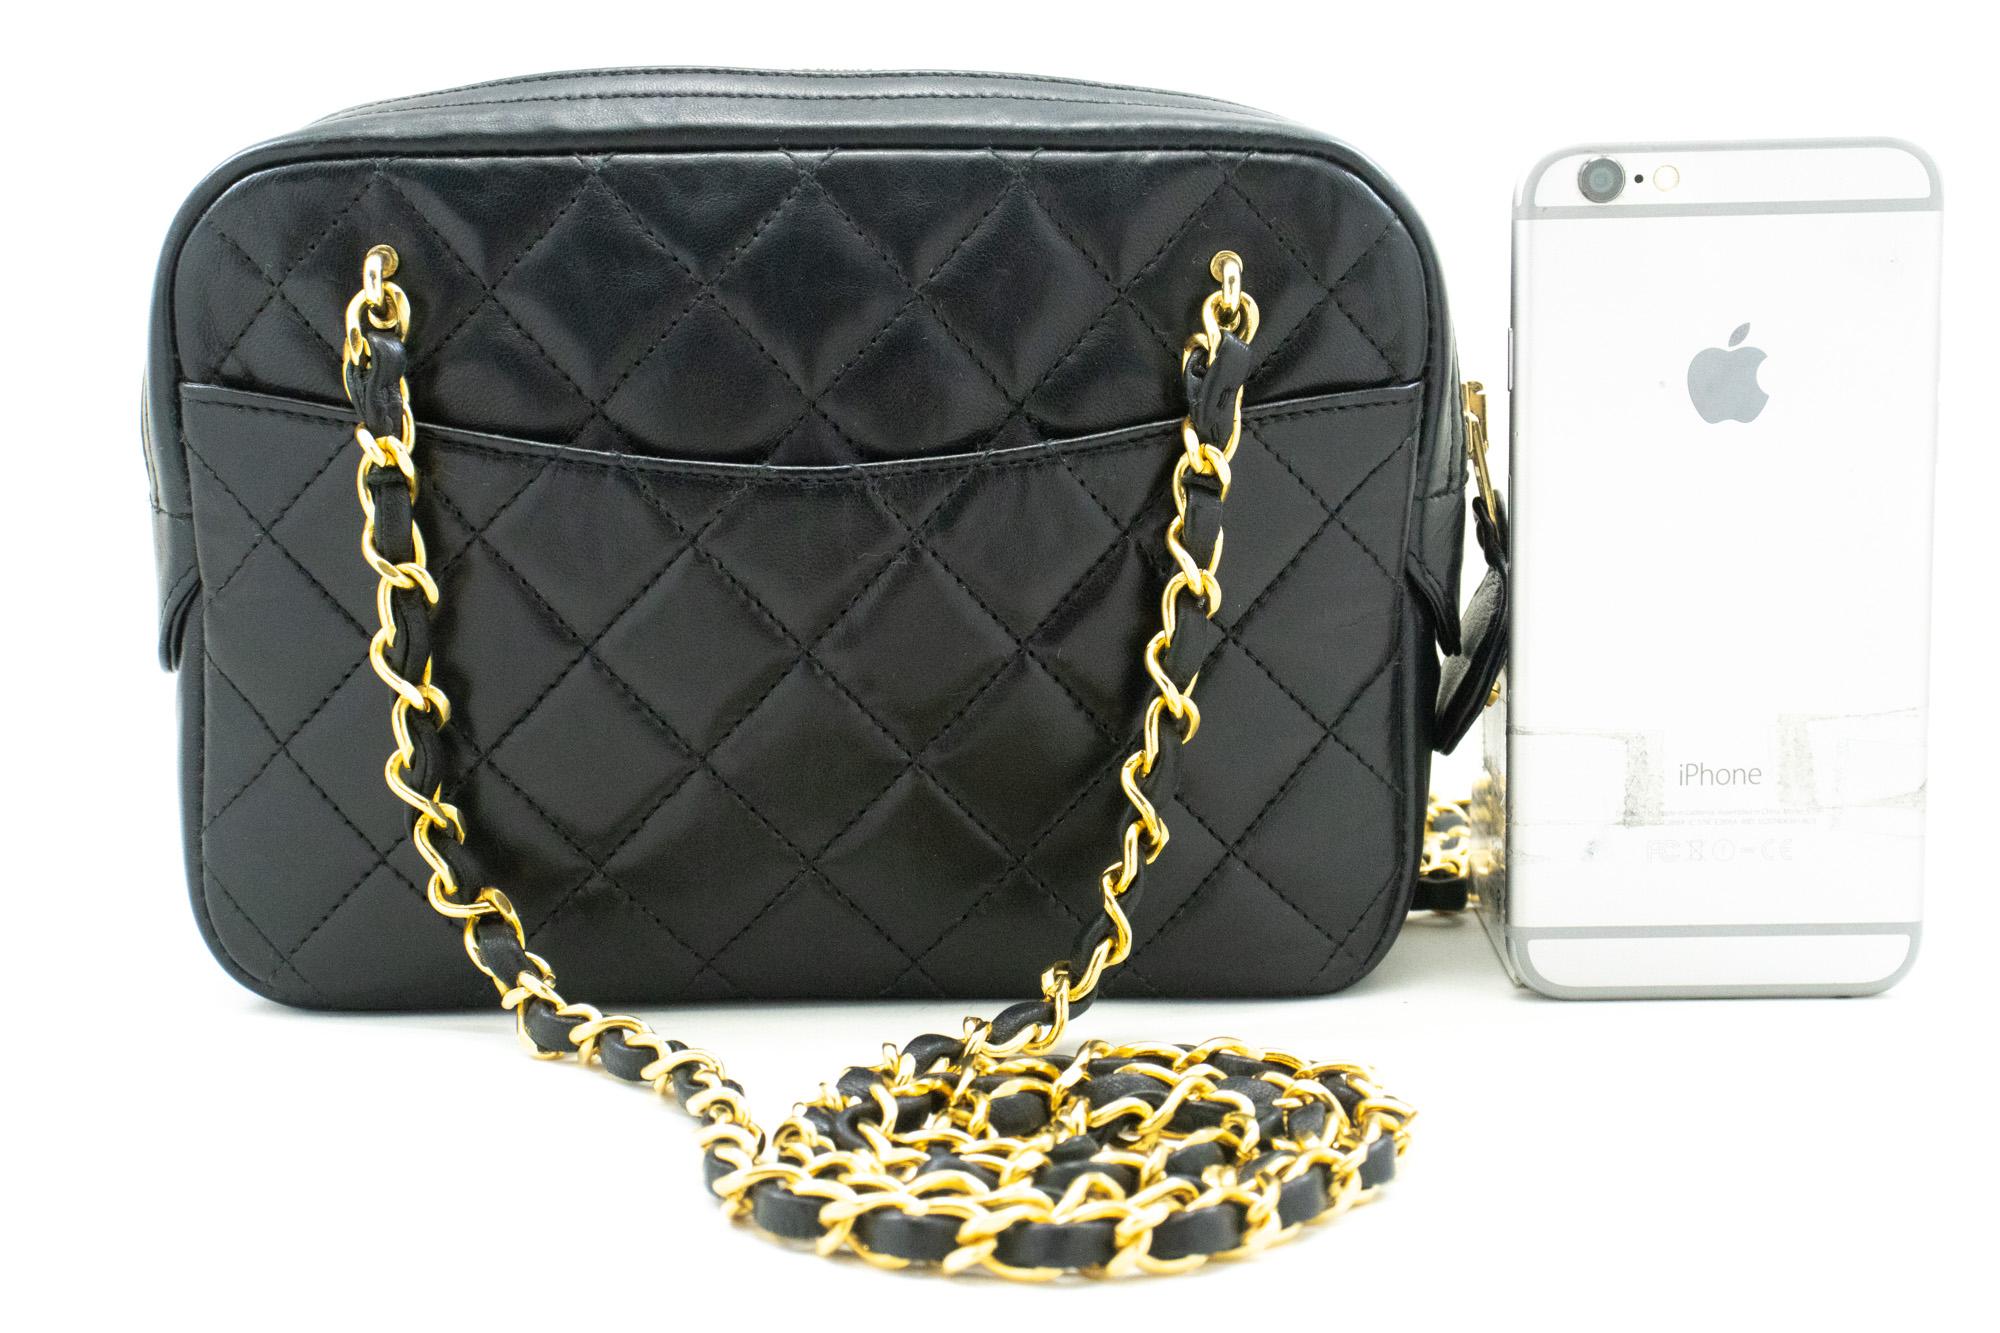 CHANEL Small Chain Shoulder Bag Lambskin Black Leather Zipper In Good Condition For Sale In Takamatsu-shi, JP